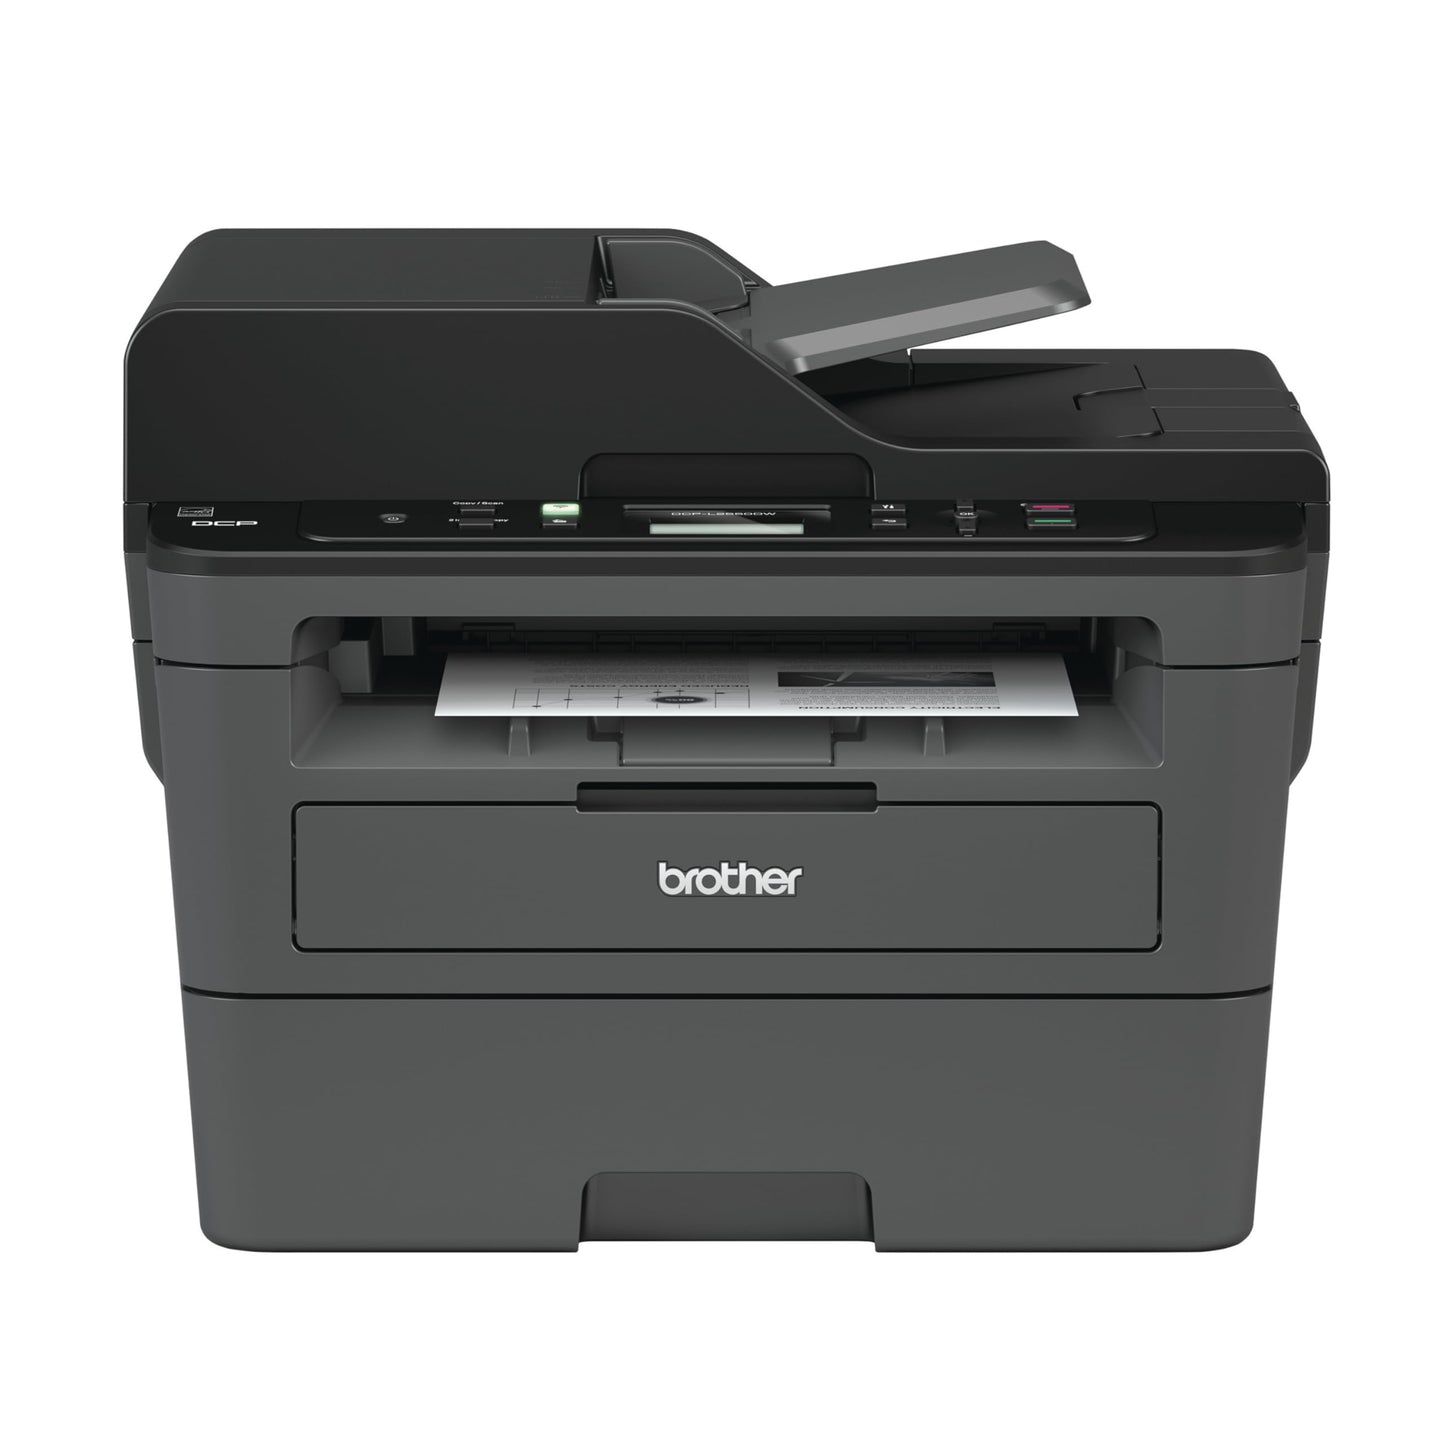 Brother Monochrome Laser Printer, Compact Multifunction Printer and Copier, DCPL2550DW, with Refresh Subscription Free Trial and Amazon Dash Replenishment Ready